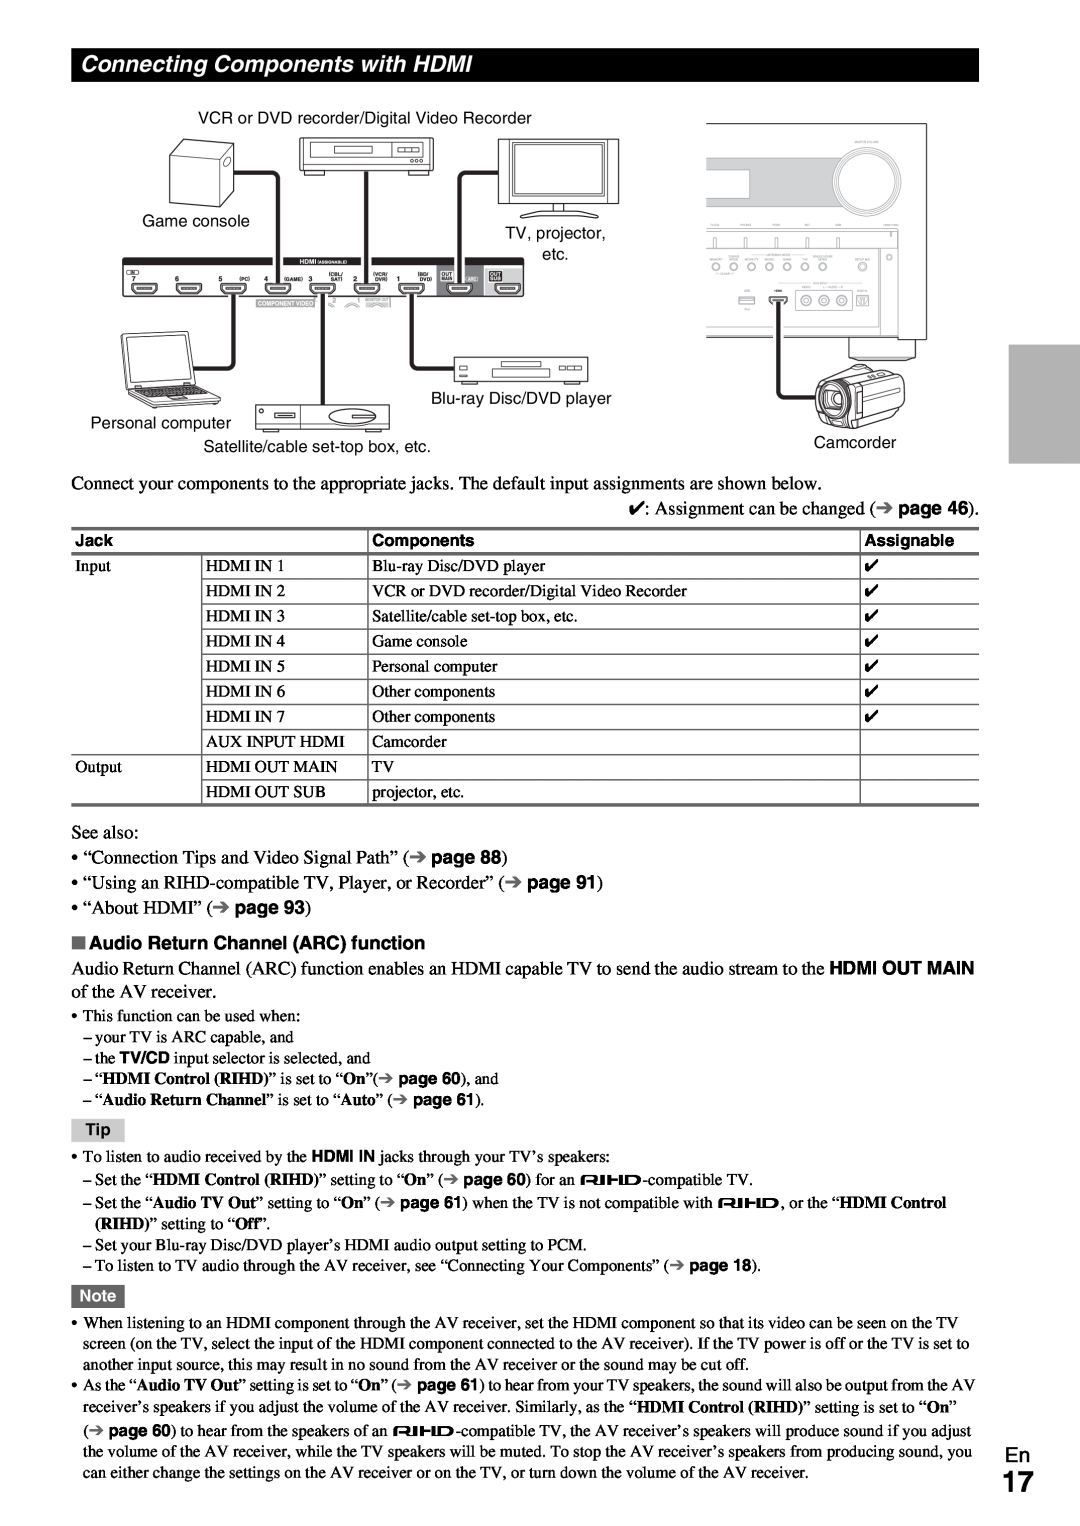 Onkyo TX-NR1009 instruction manual Connecting Components with HDMI, Audio Return Channel ARC function 